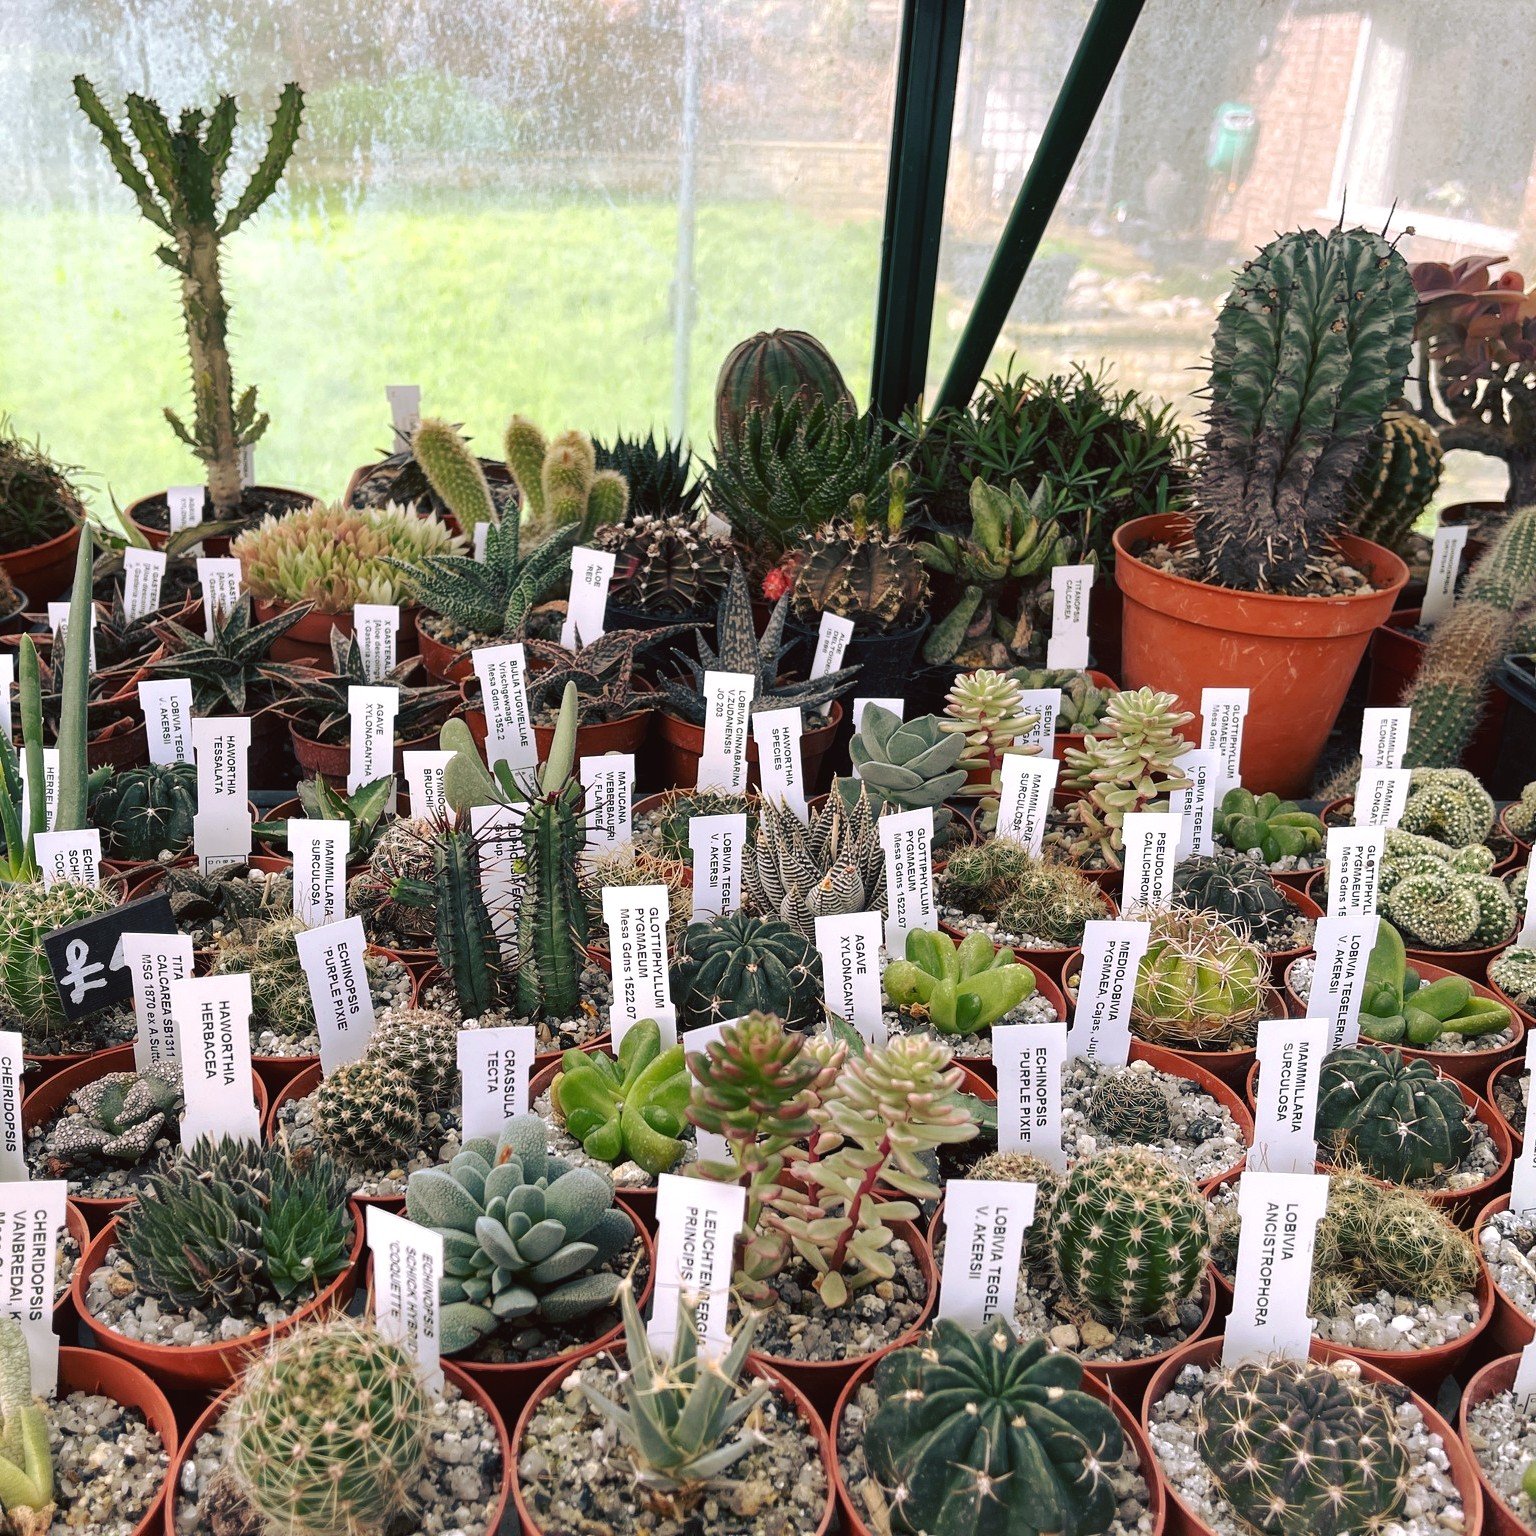 One of the best parts of my job as creator and host of On The Ledge is going to visit growers at work - I had a wonderful chat with Somerset;s Tony Irons (@tonyirons_cacti) about all things succulent, in particular Lithops. You can hear his interview